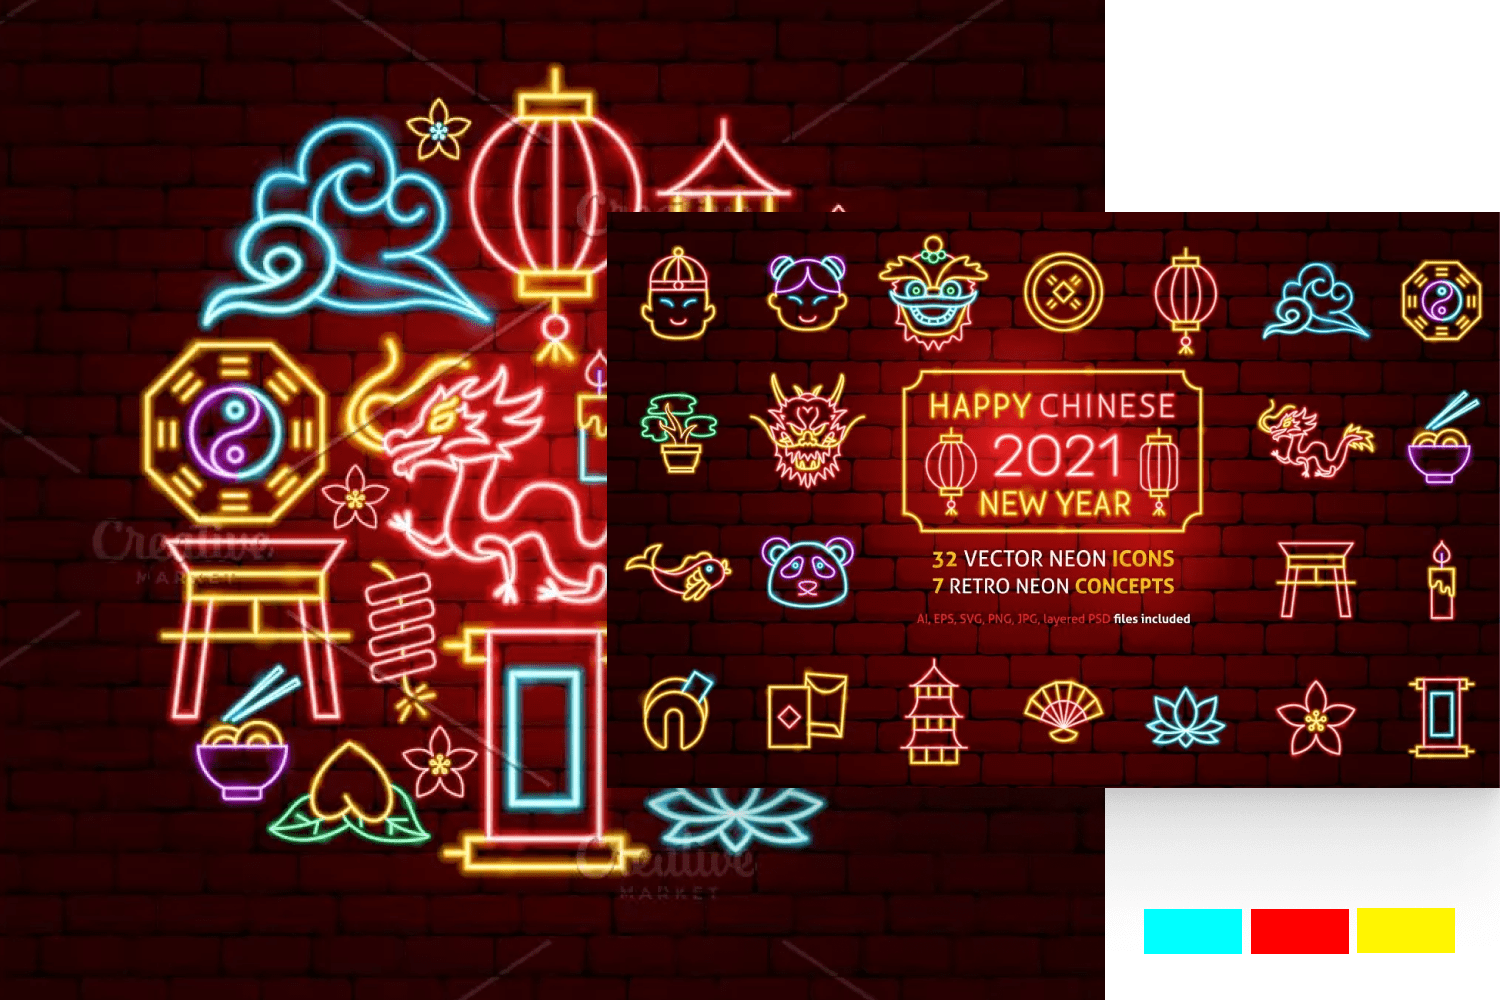 A collage of icons in neon colors on the theme of the Chinese New Year.